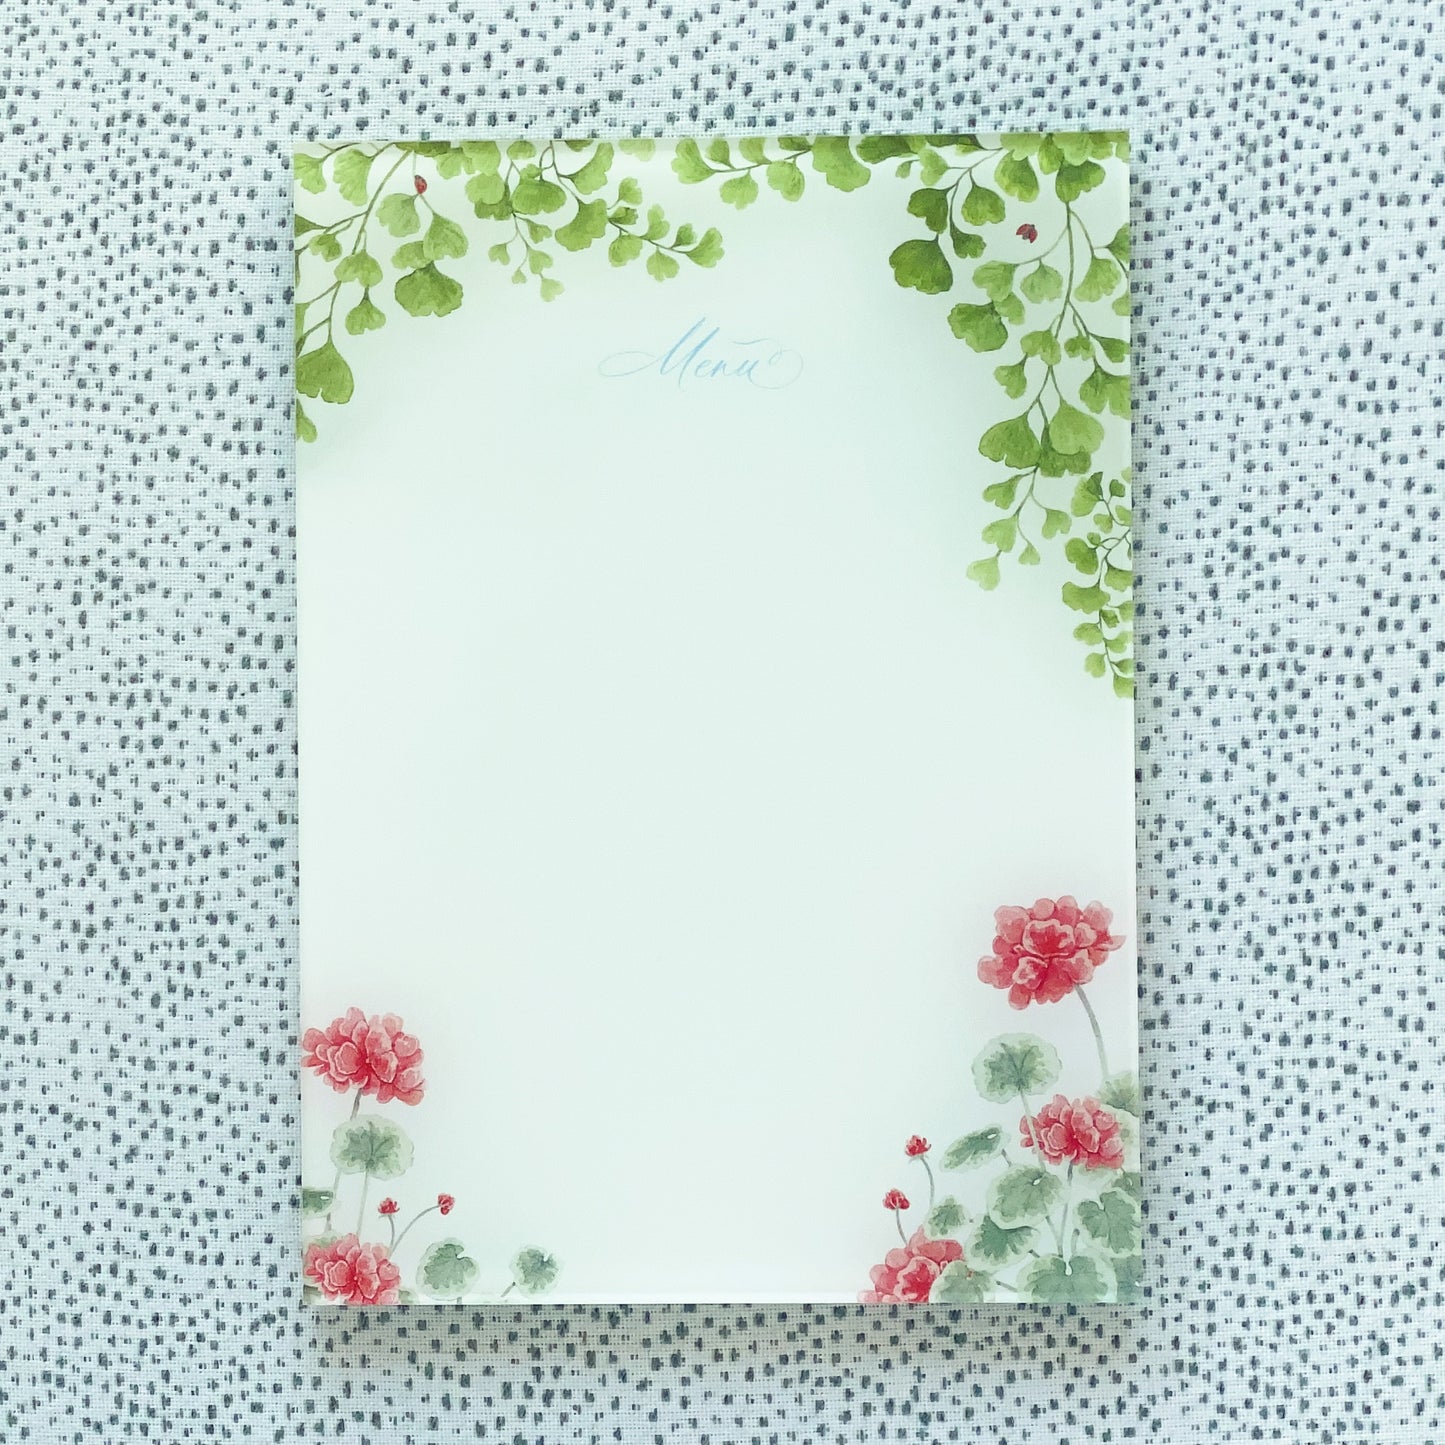 Acrylic menu with maidenhair fern and red geranium watercolor artwork as a frame.